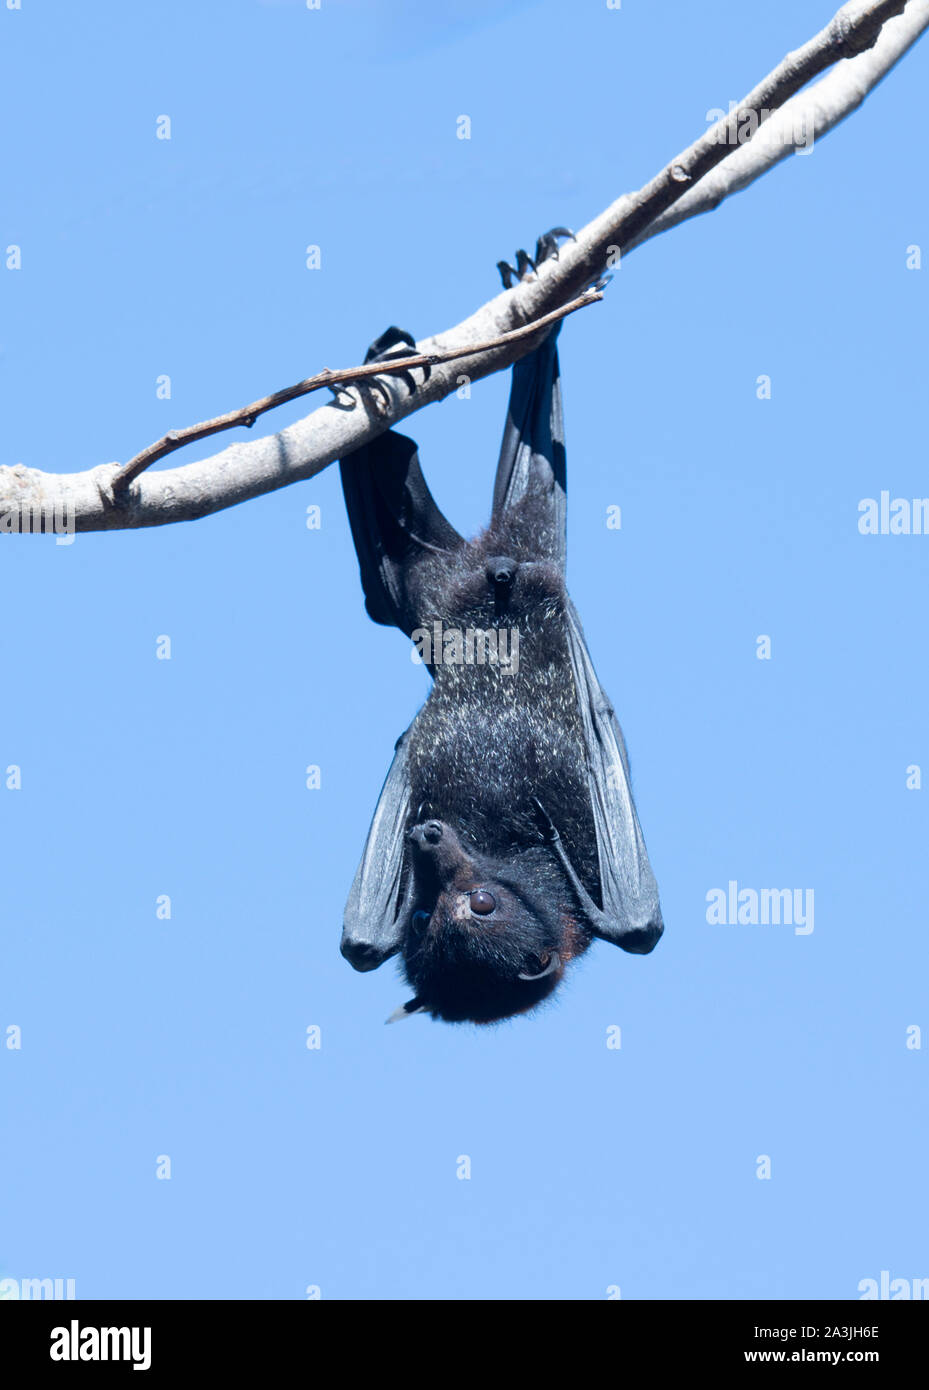 A Black Flying Fox (Pteropus alecto) hanging from a branch, Ravenswood, Queensland, QLD, Australia Stock Photo